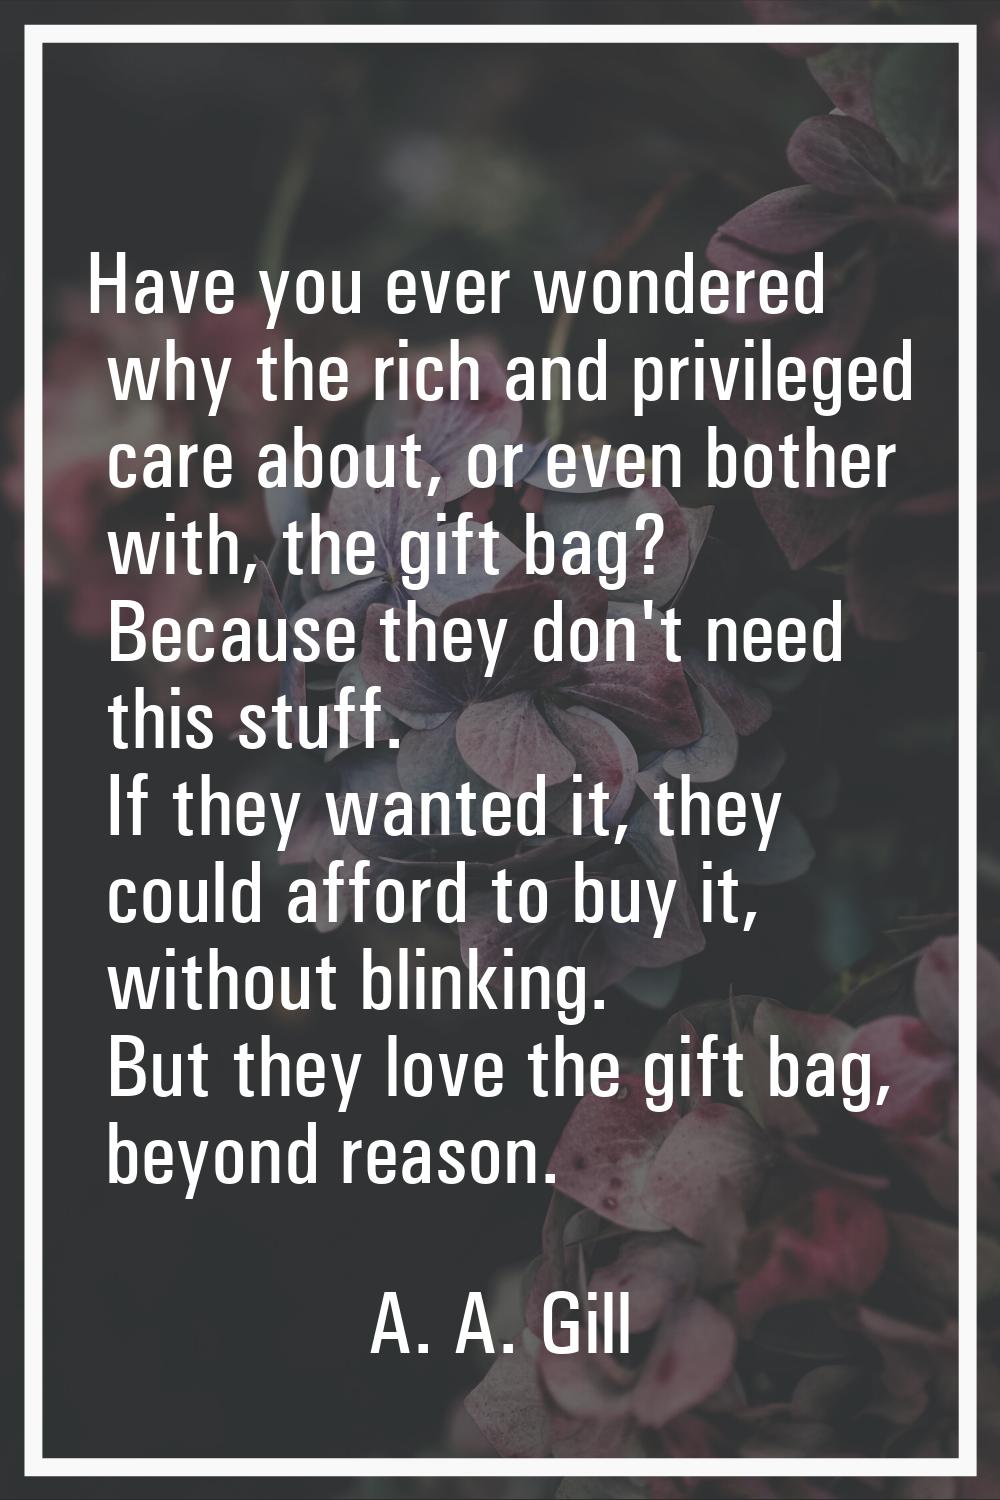 Have you ever wondered why the rich and privileged care about, or even bother with, the gift bag? B